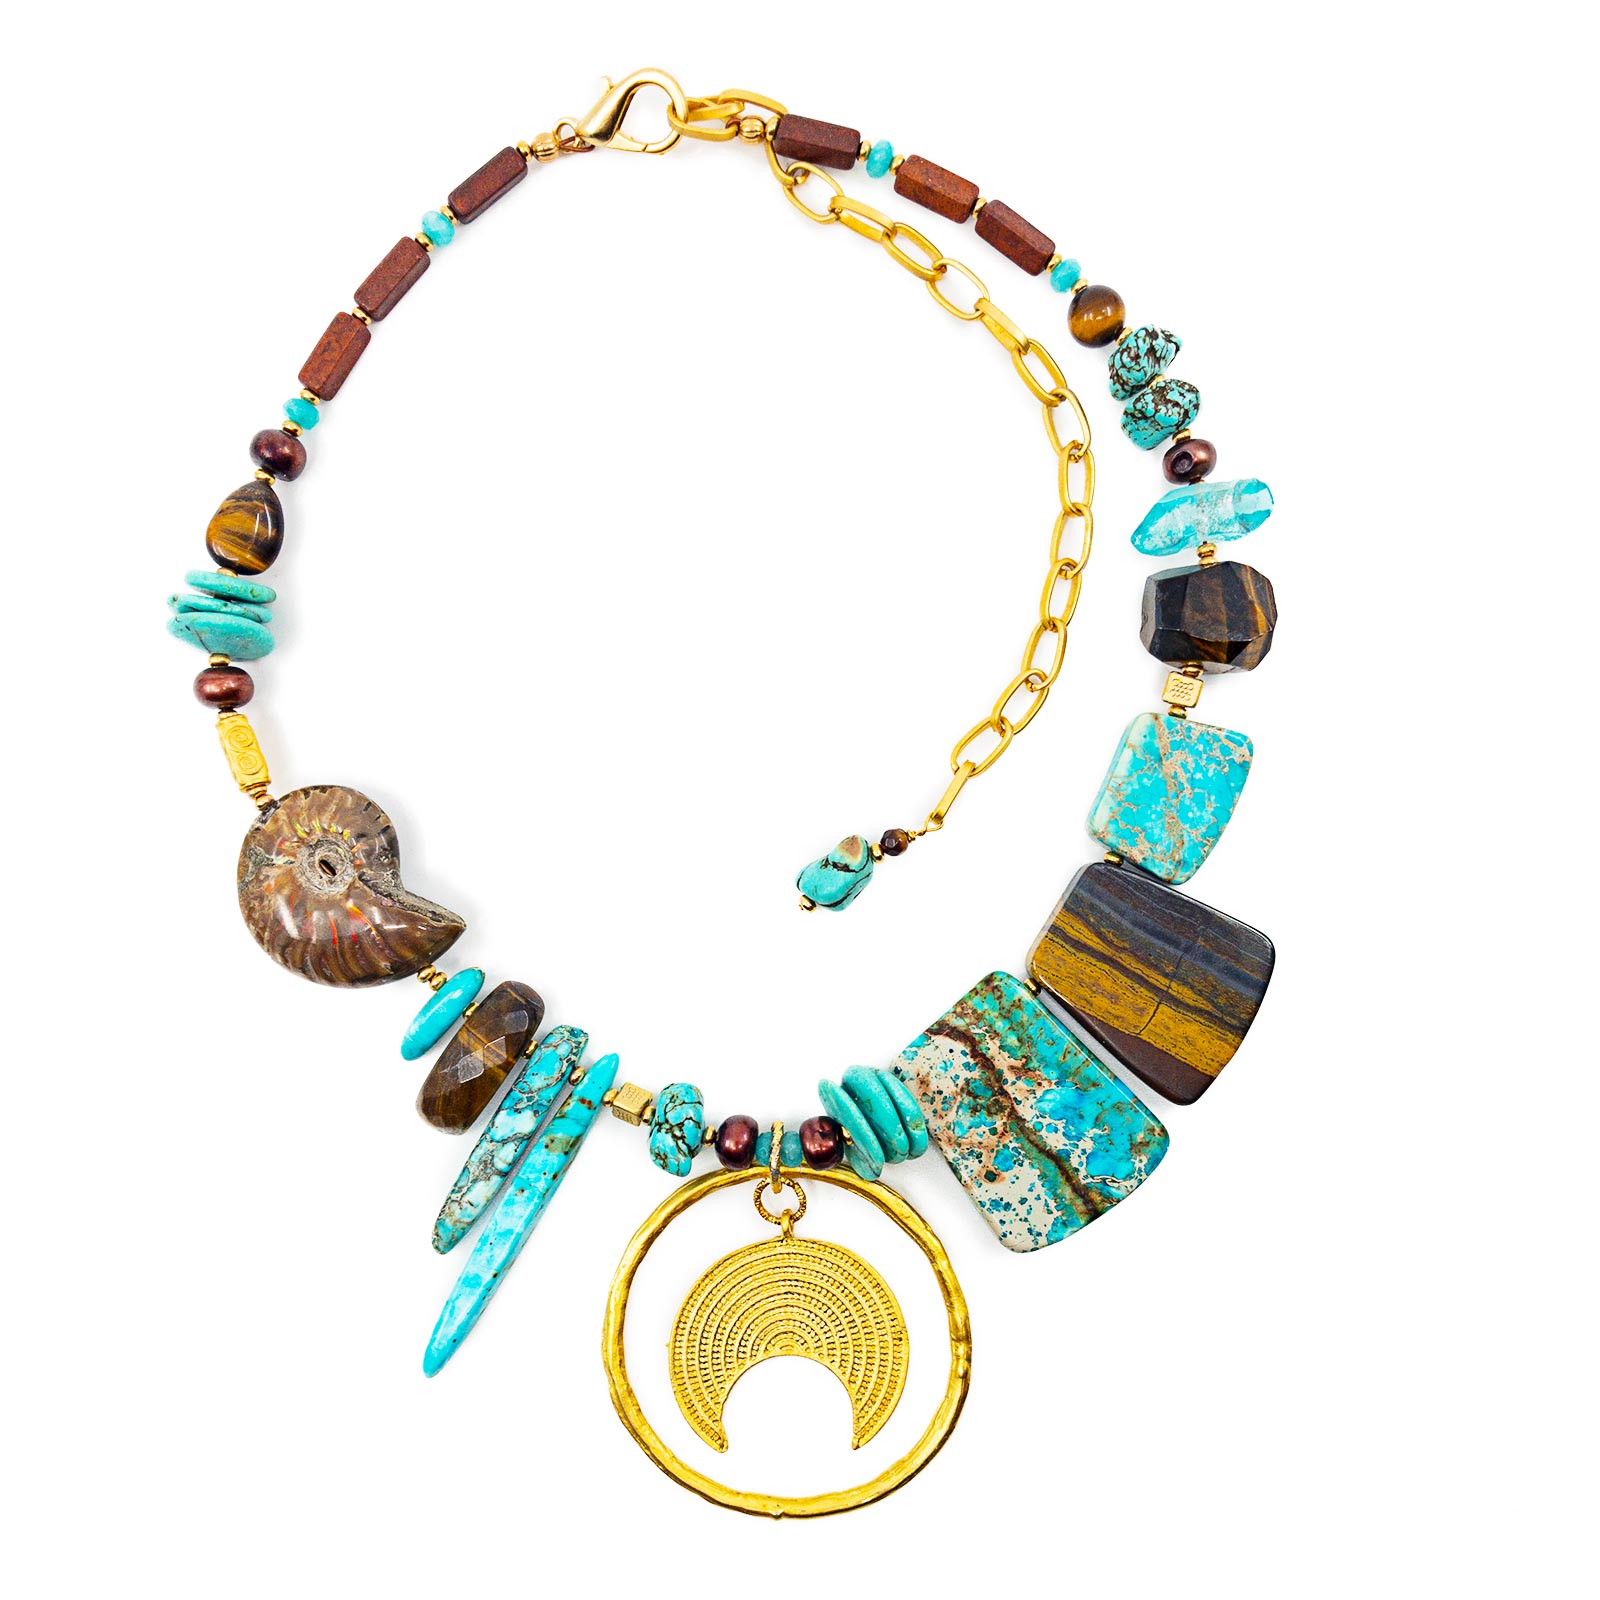 N°746 Moonlight & the Ammonite's Daughter Statement Necklace